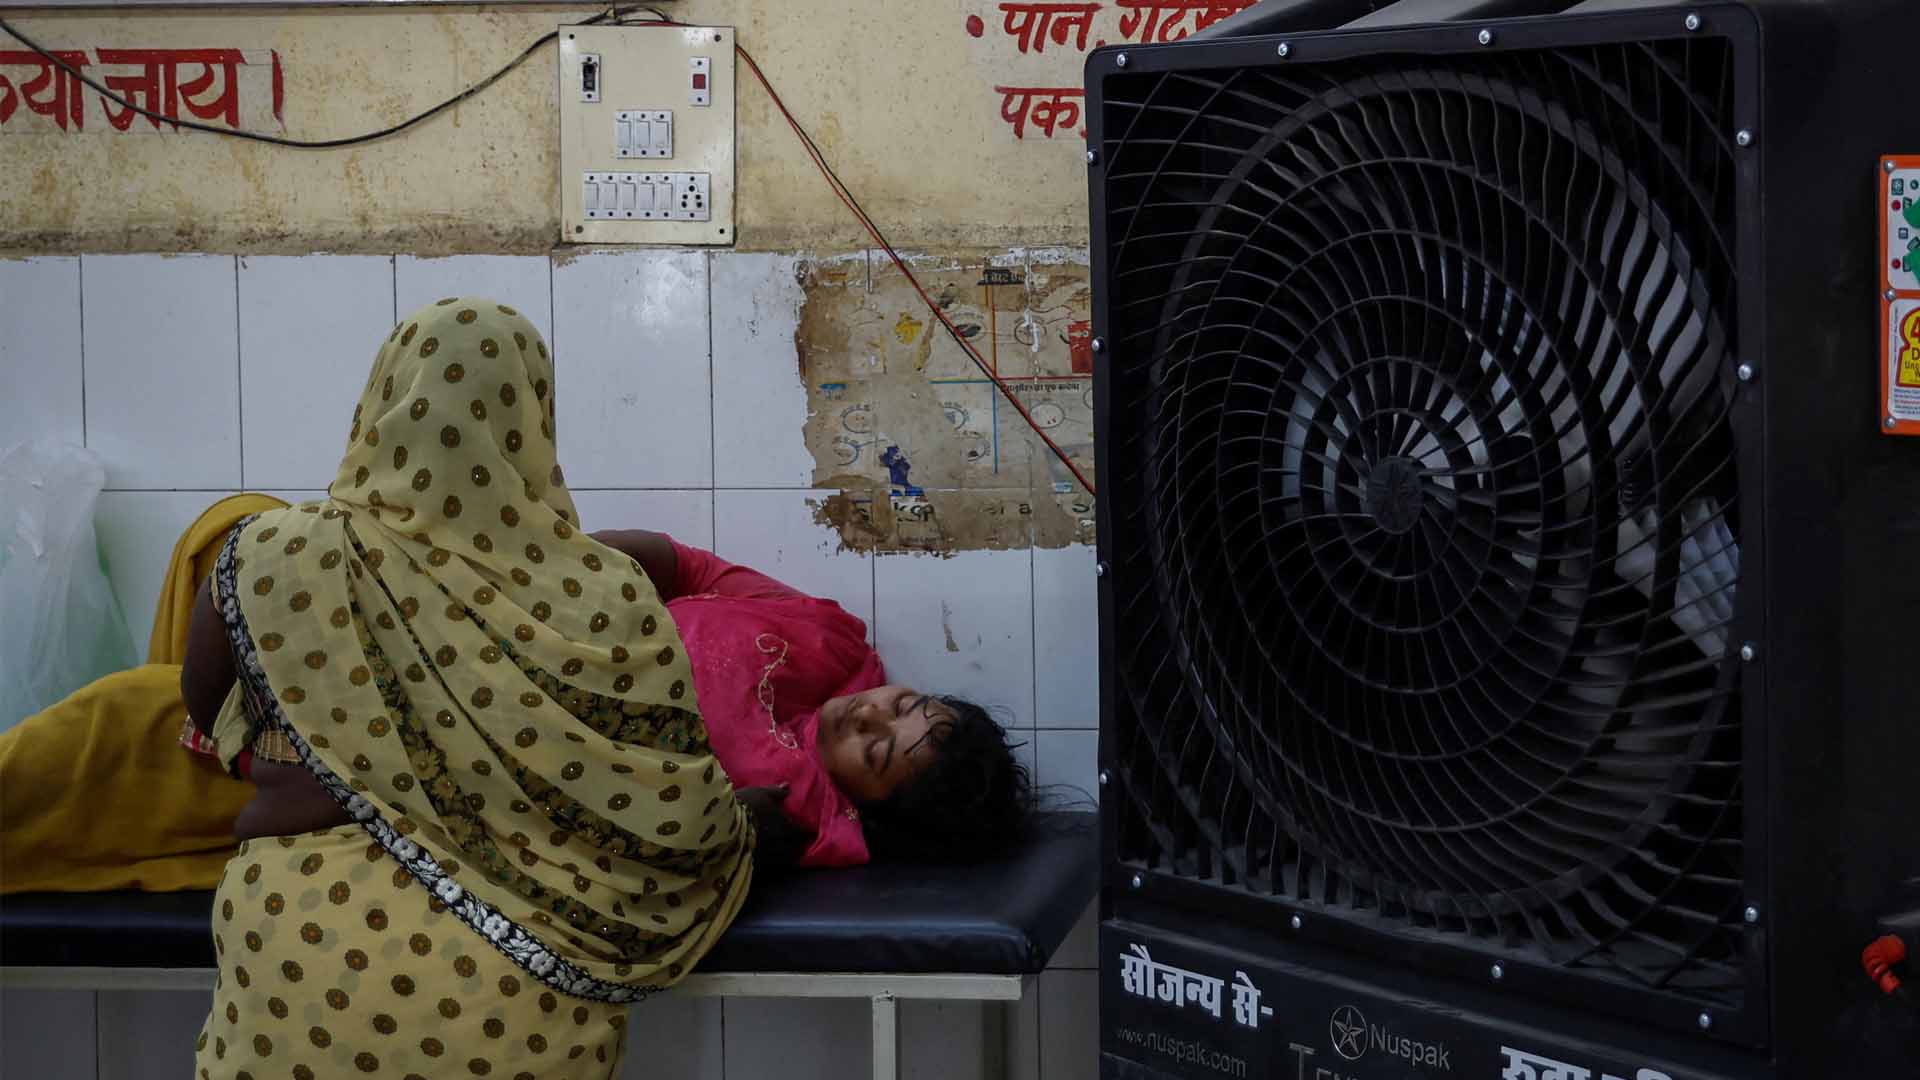 A relative stands next to a patient lying on a strecher inside an emergency ward at a hospital in Ballia District in the northern state of Uttar Pradesh, India, June 21, 2023. Beside them is a large black fan.